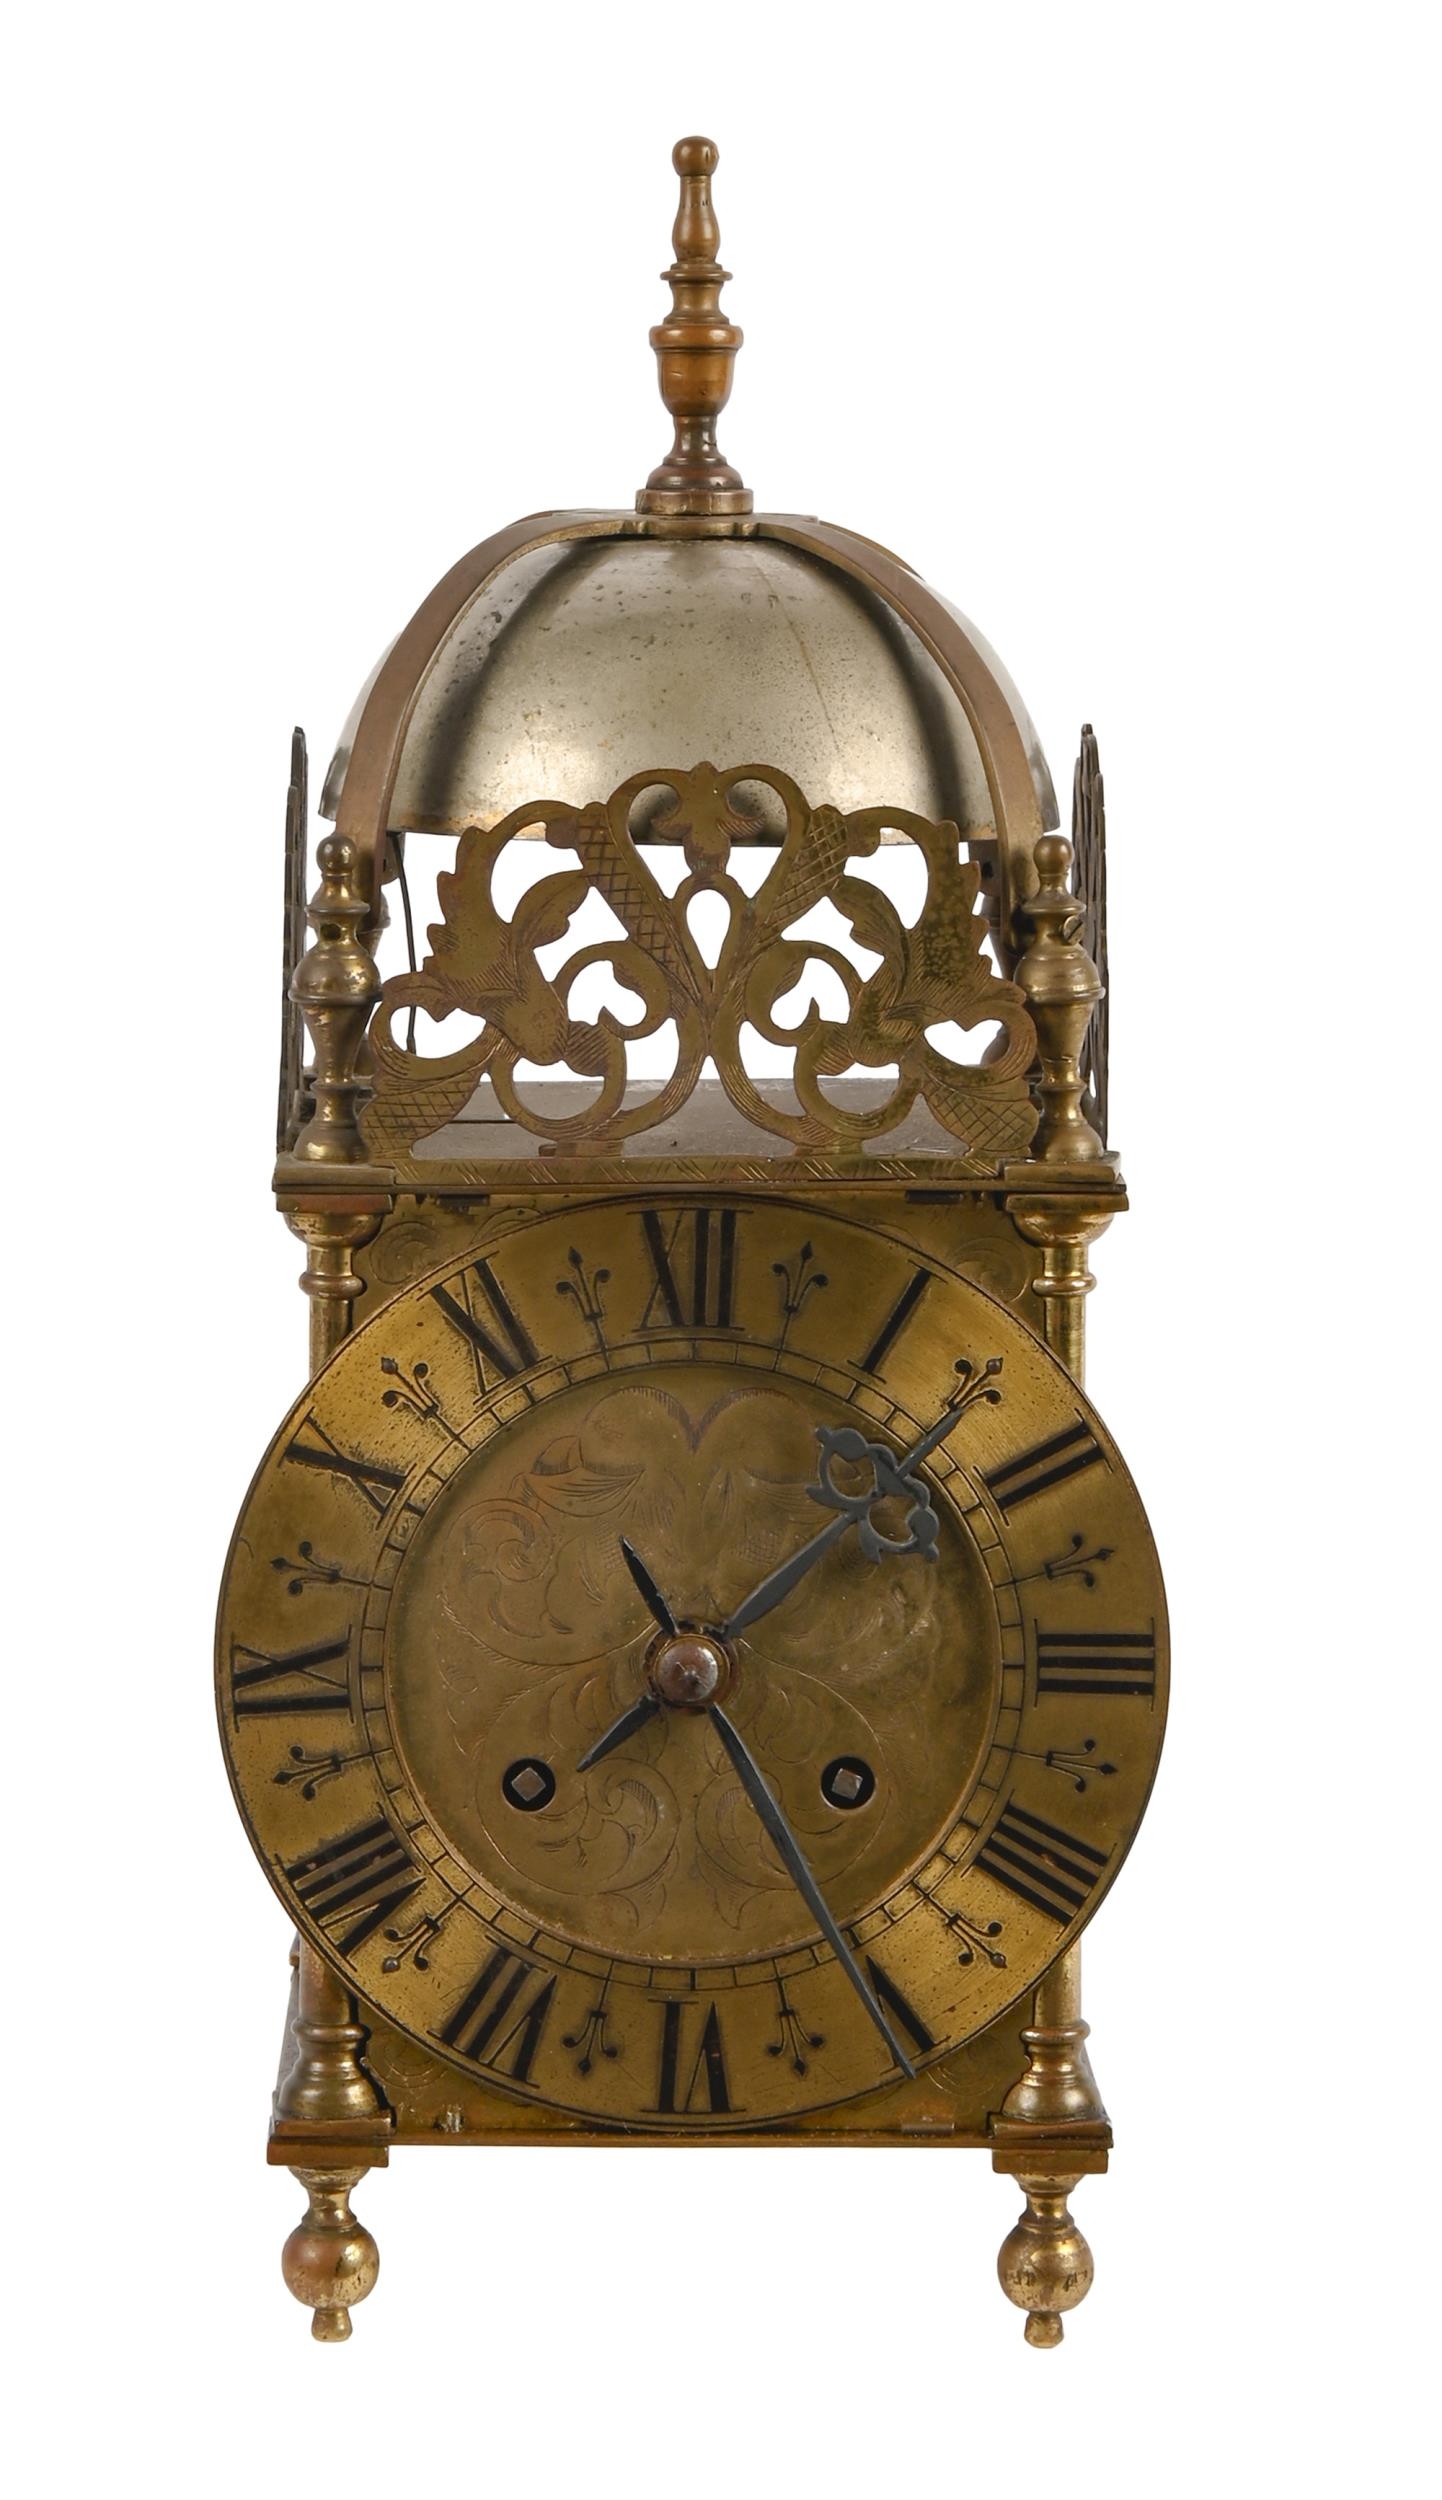 An English brass lantern clock, early 20th c, in 17th c style, the backplate stamped CARTER BOWLES